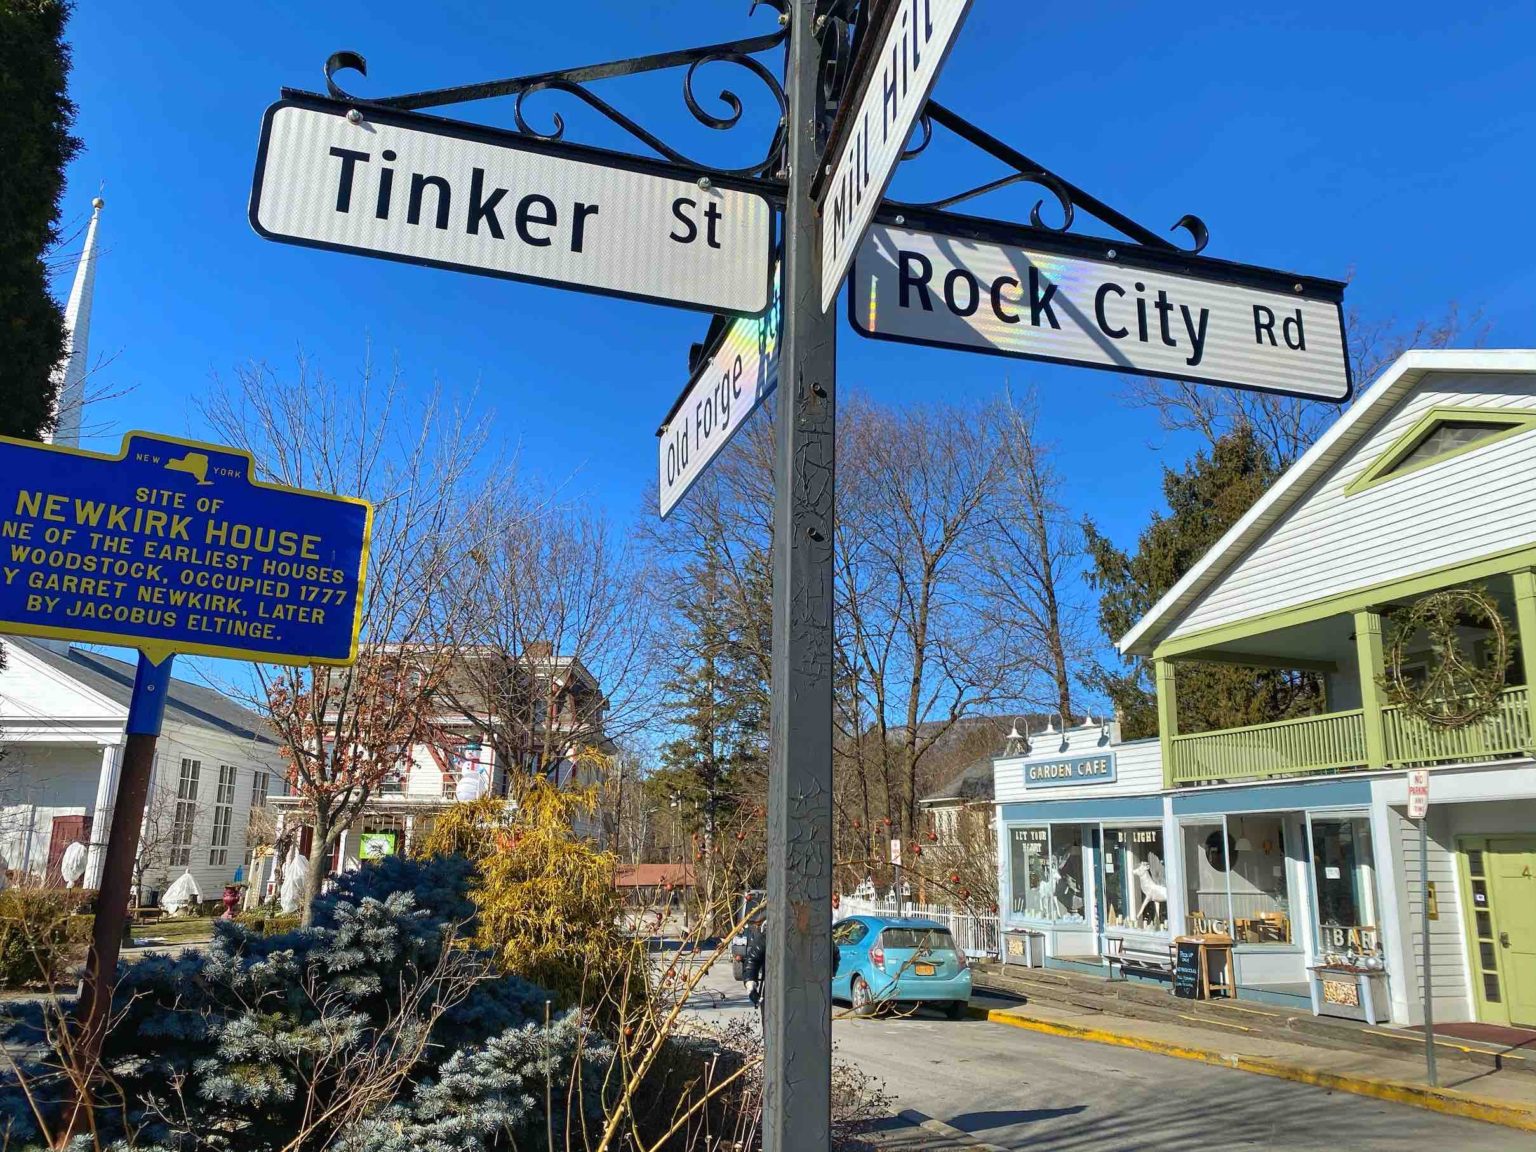 Woodstock, NY The Winter Travel Guide Let's Be Merry